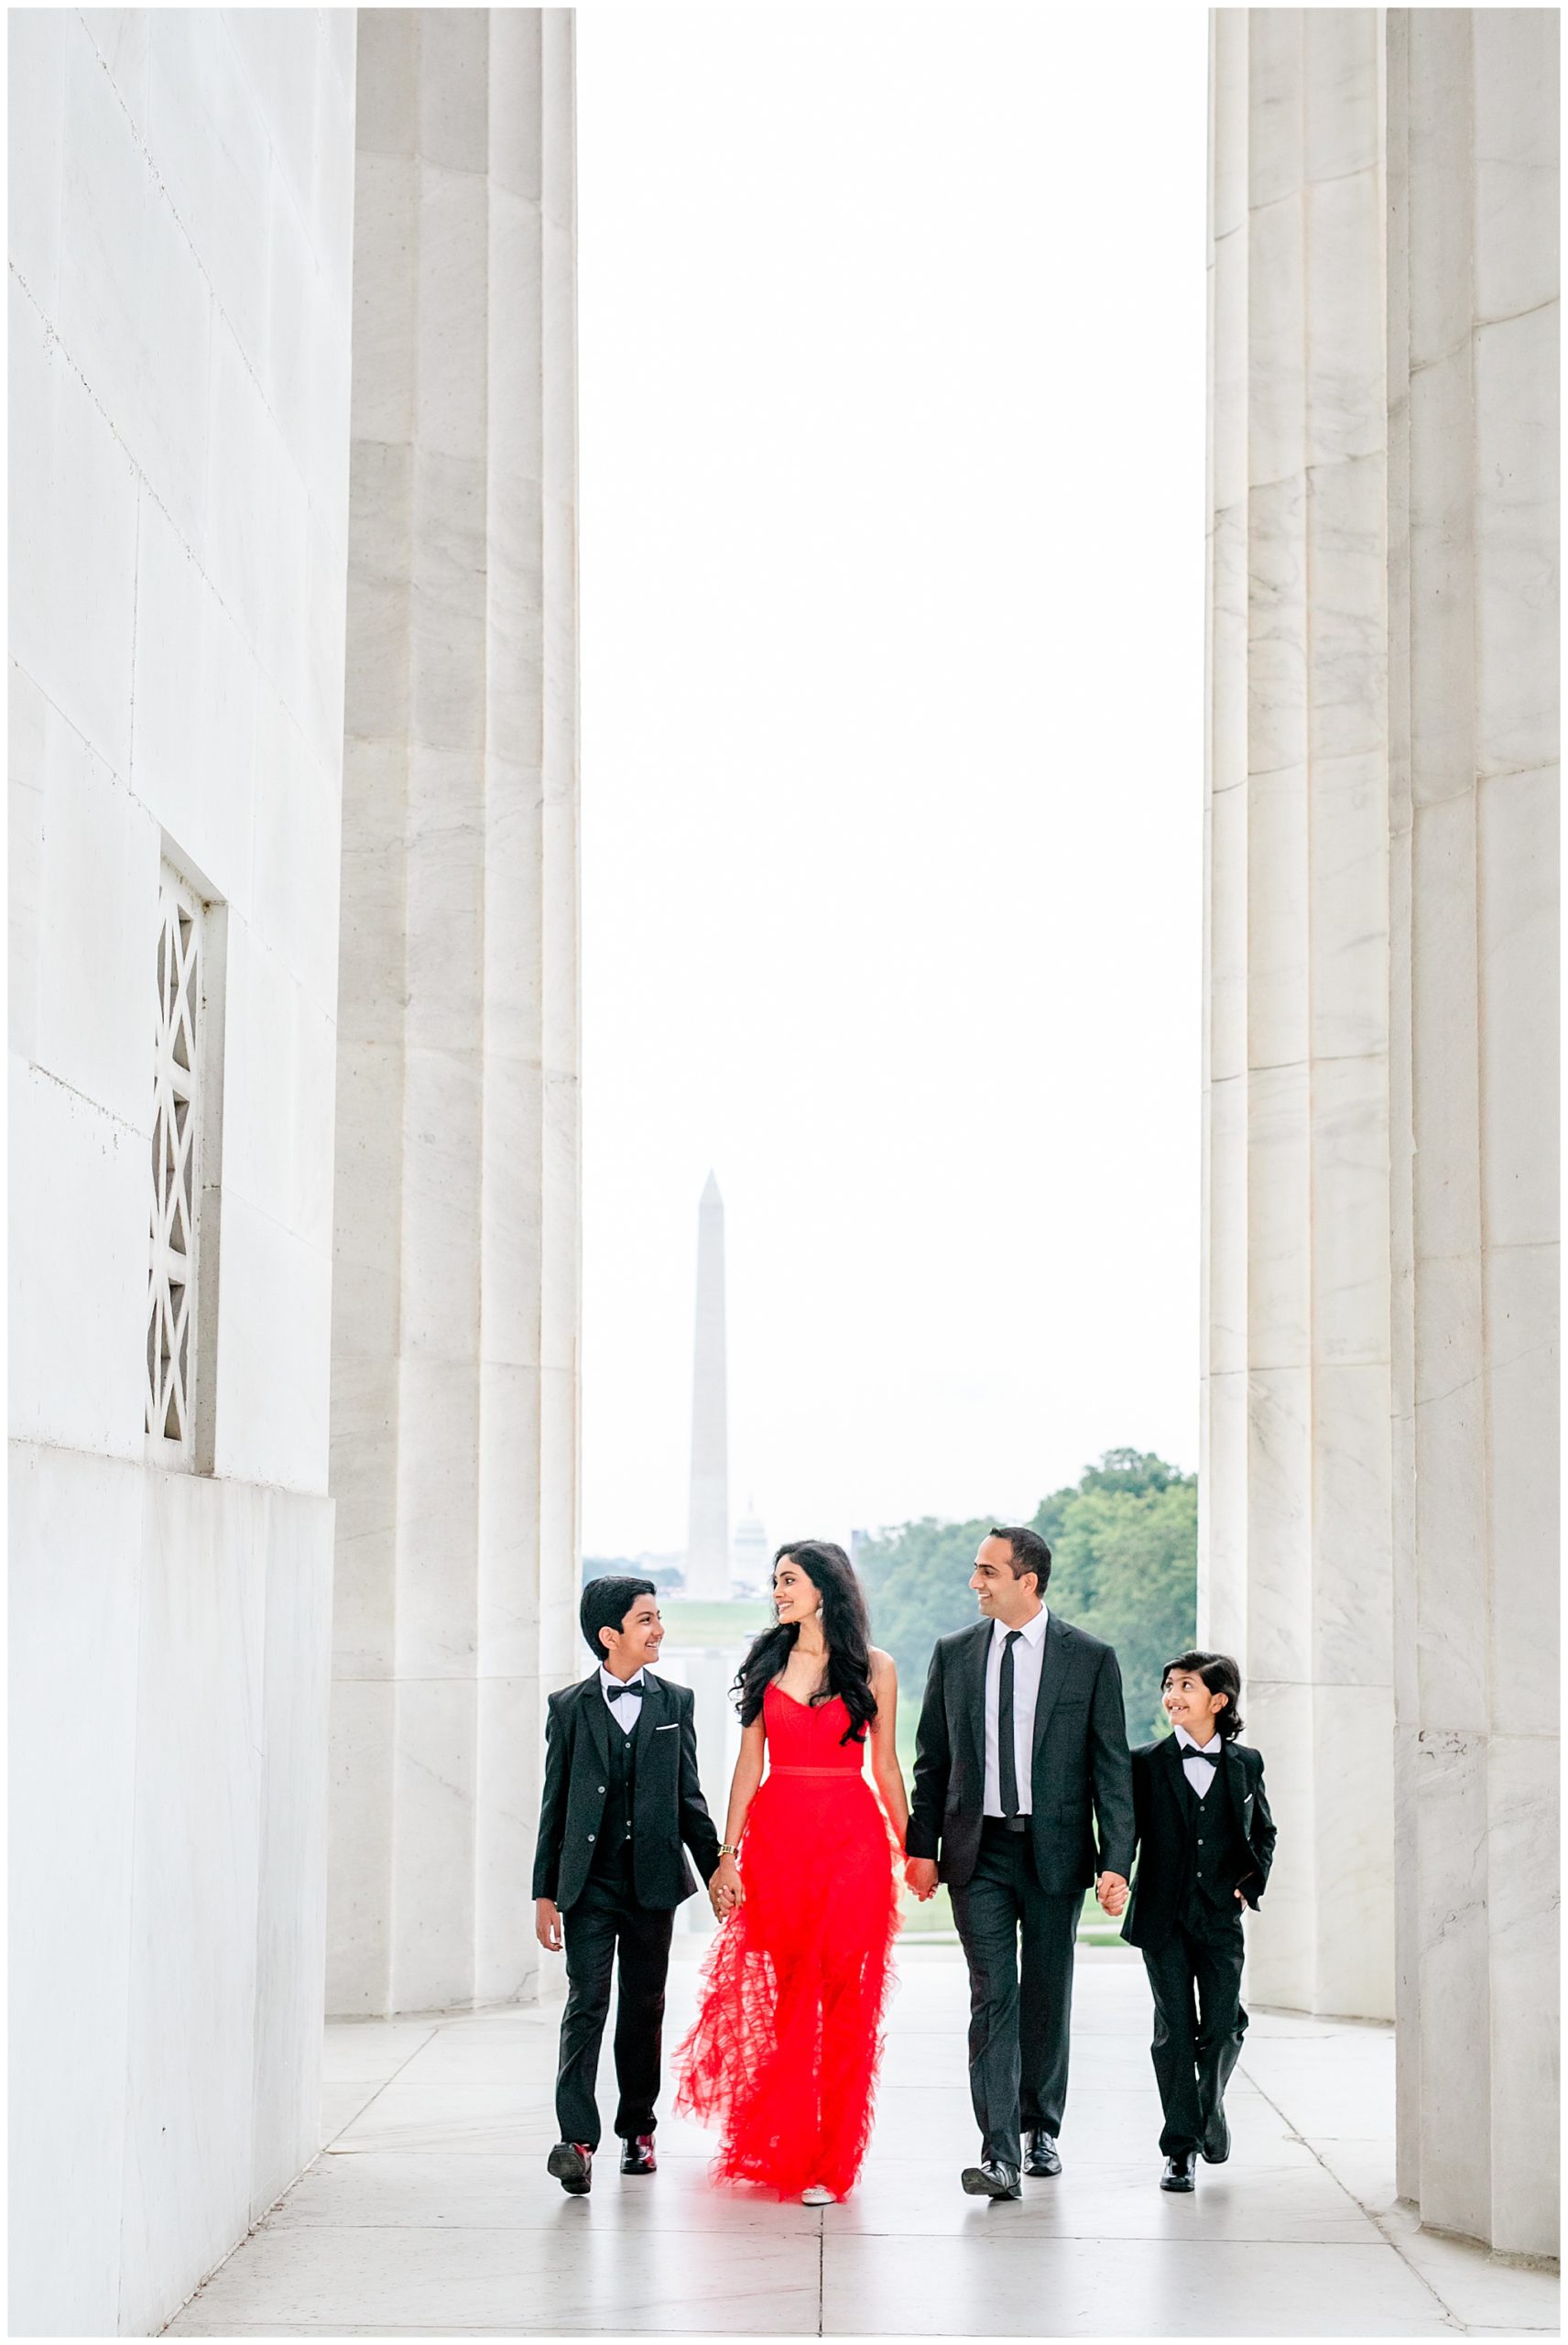 formal Lincoln Memorial family photos, formal family portraits, Lincoln Memorial portraits, Washington DC family photos, National Mall portraits, Rachel E.H. Photography, formal family photos, DC photographer, family of four